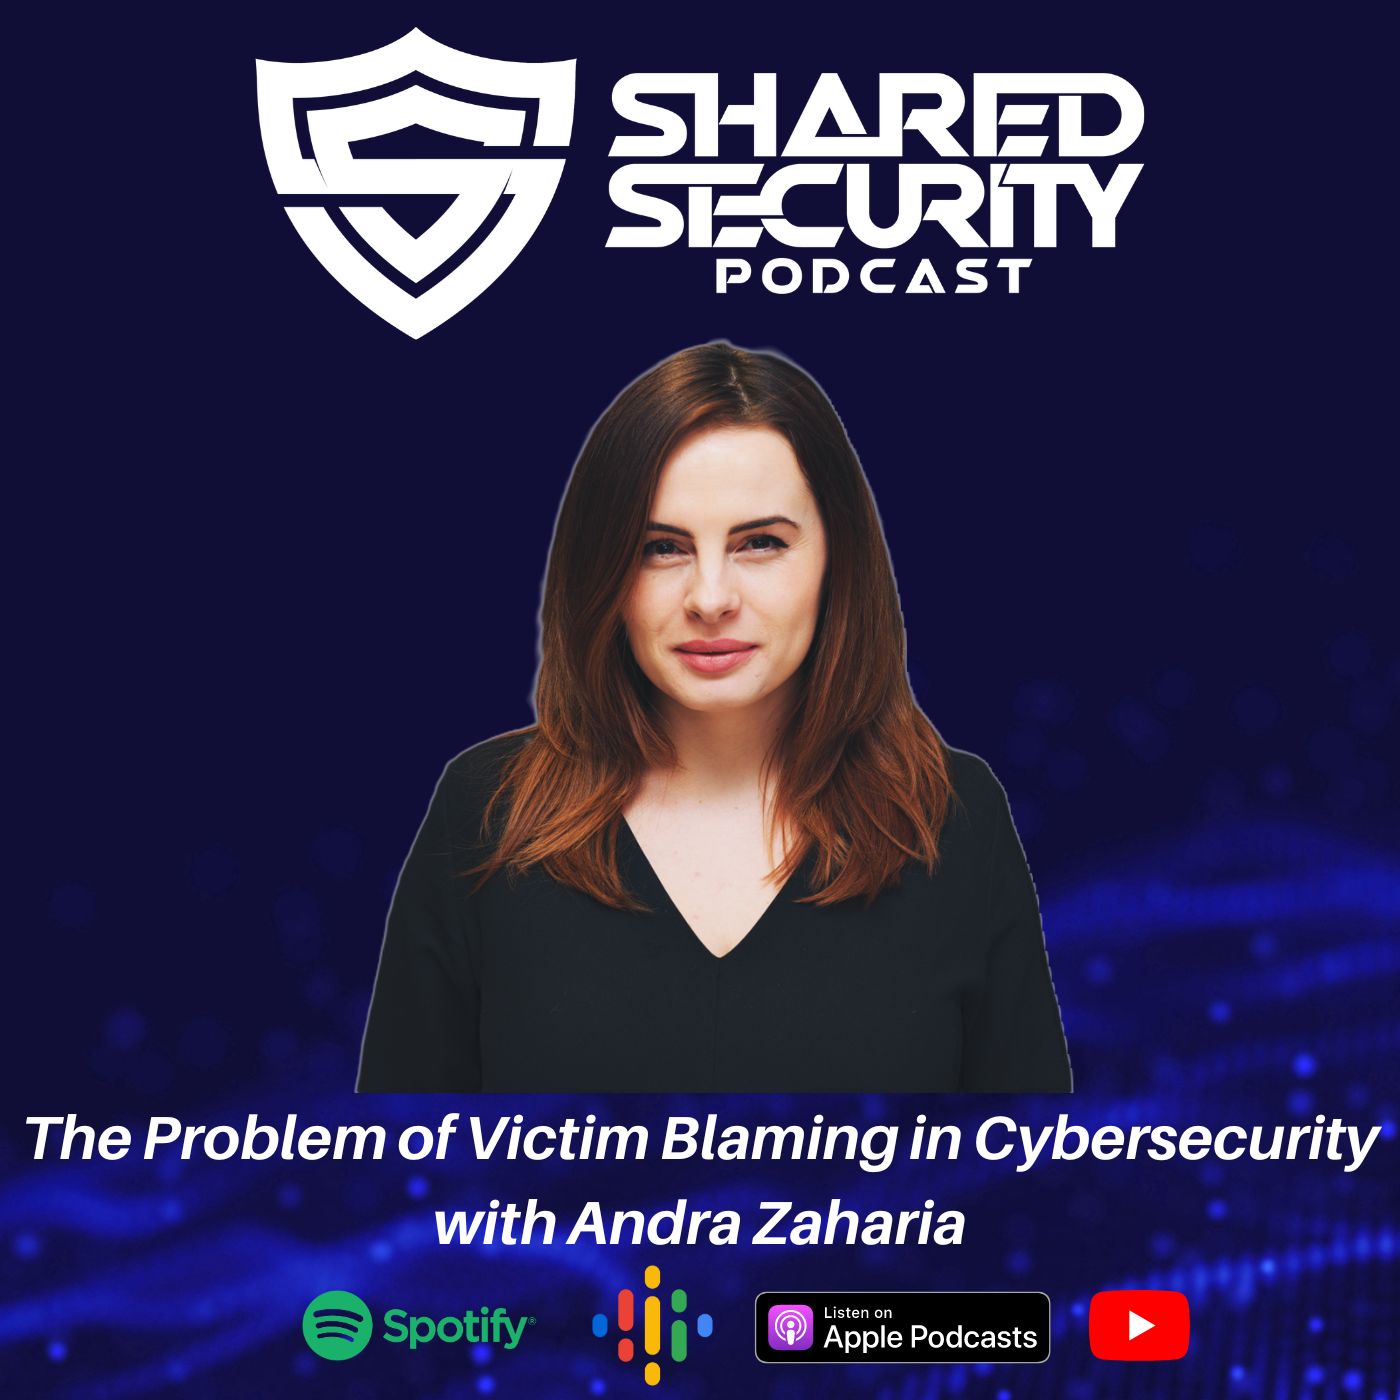 The Problem of Victim Blaming in Cybersecurity: Empathy, Responsibility & Ethical Practices